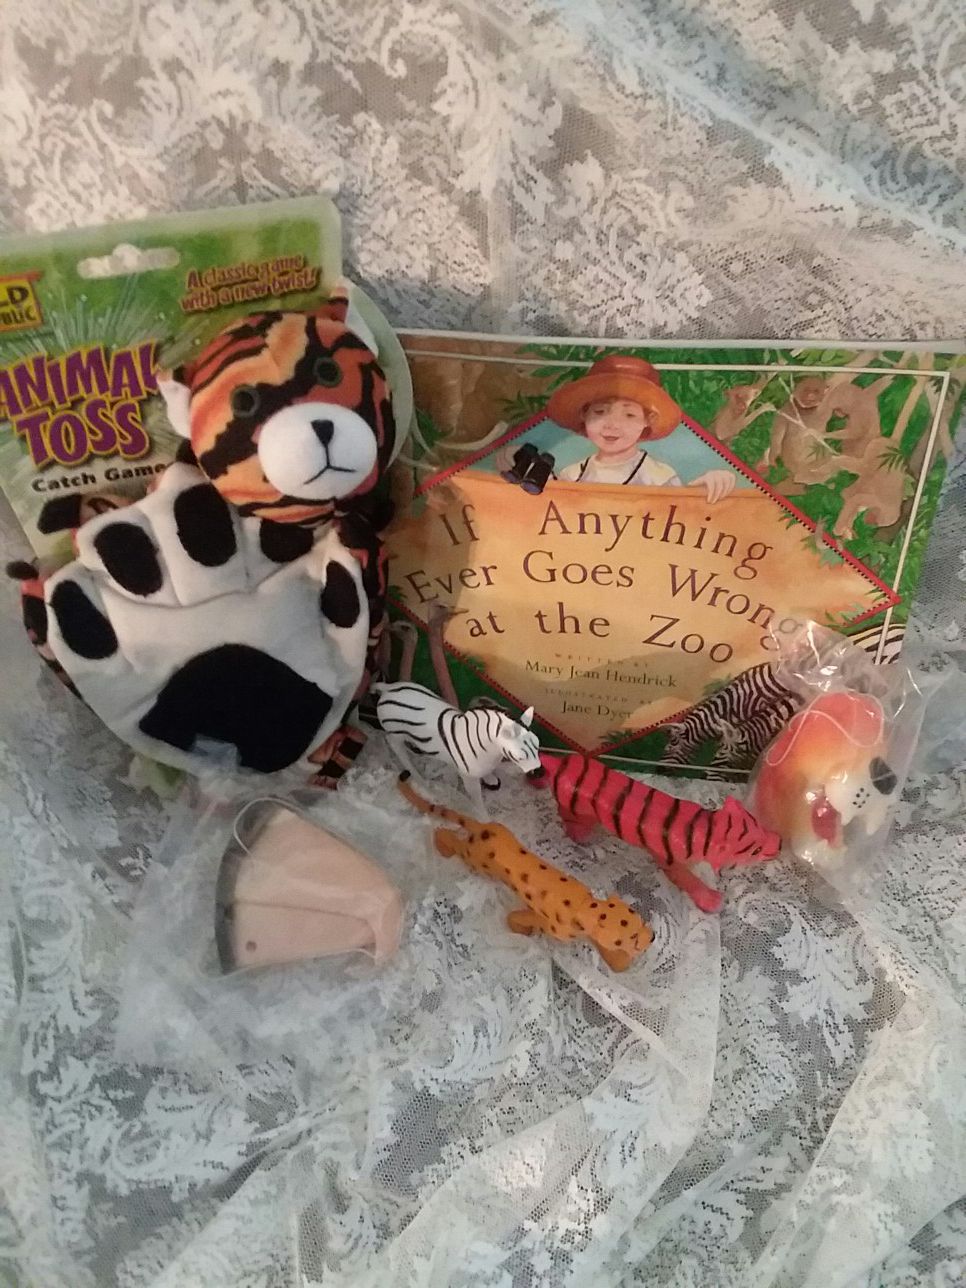 If Anything Ever Goes Wrong At The Zoo - Paperback Book & Wild Republic Toy Collection